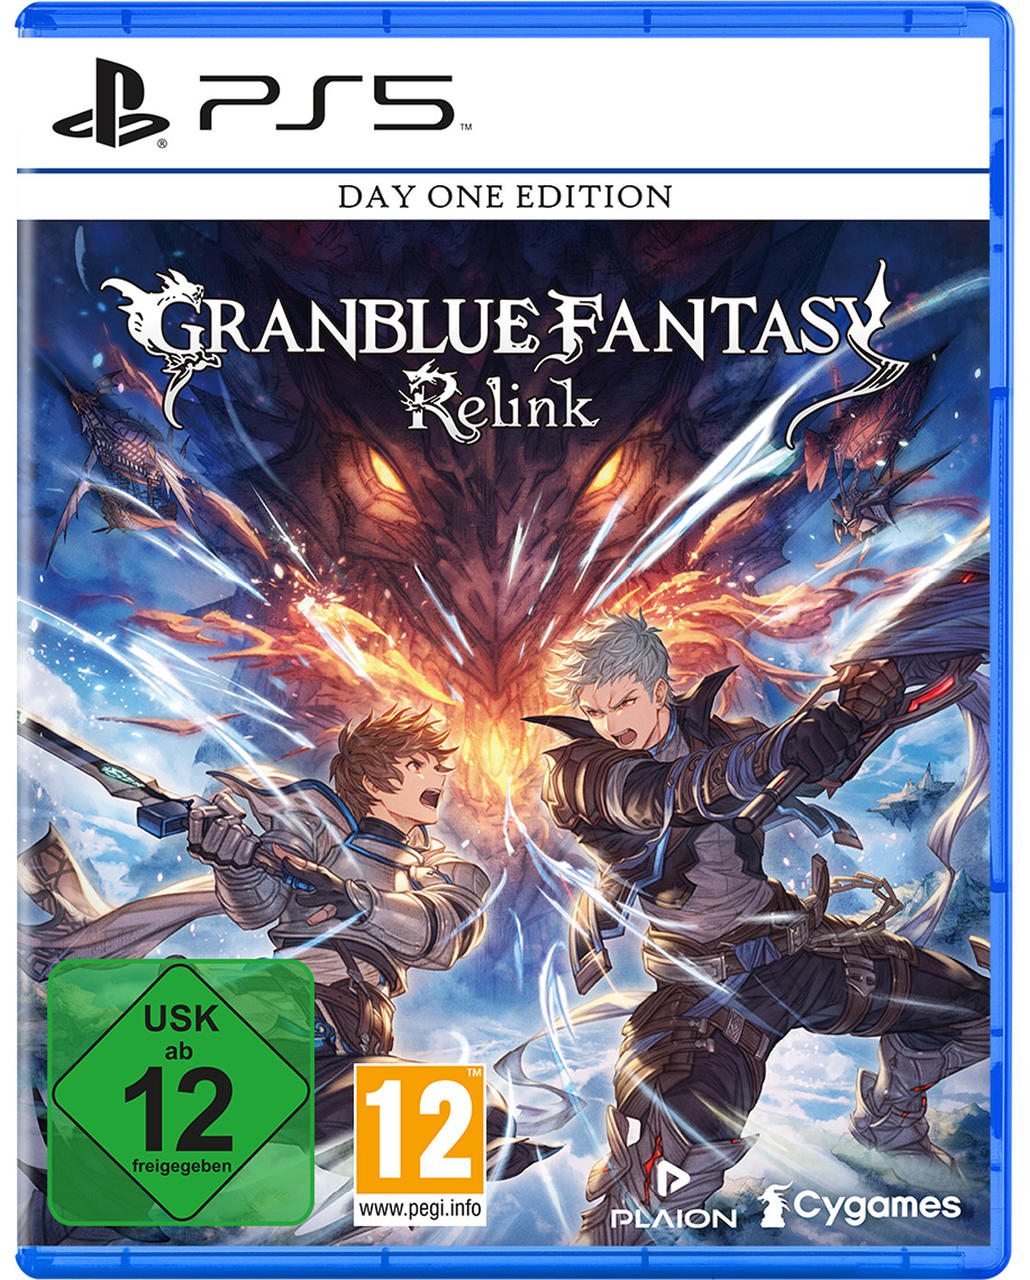 Day - One 5] Granblue Relink Fantasy Edition [PlayStation